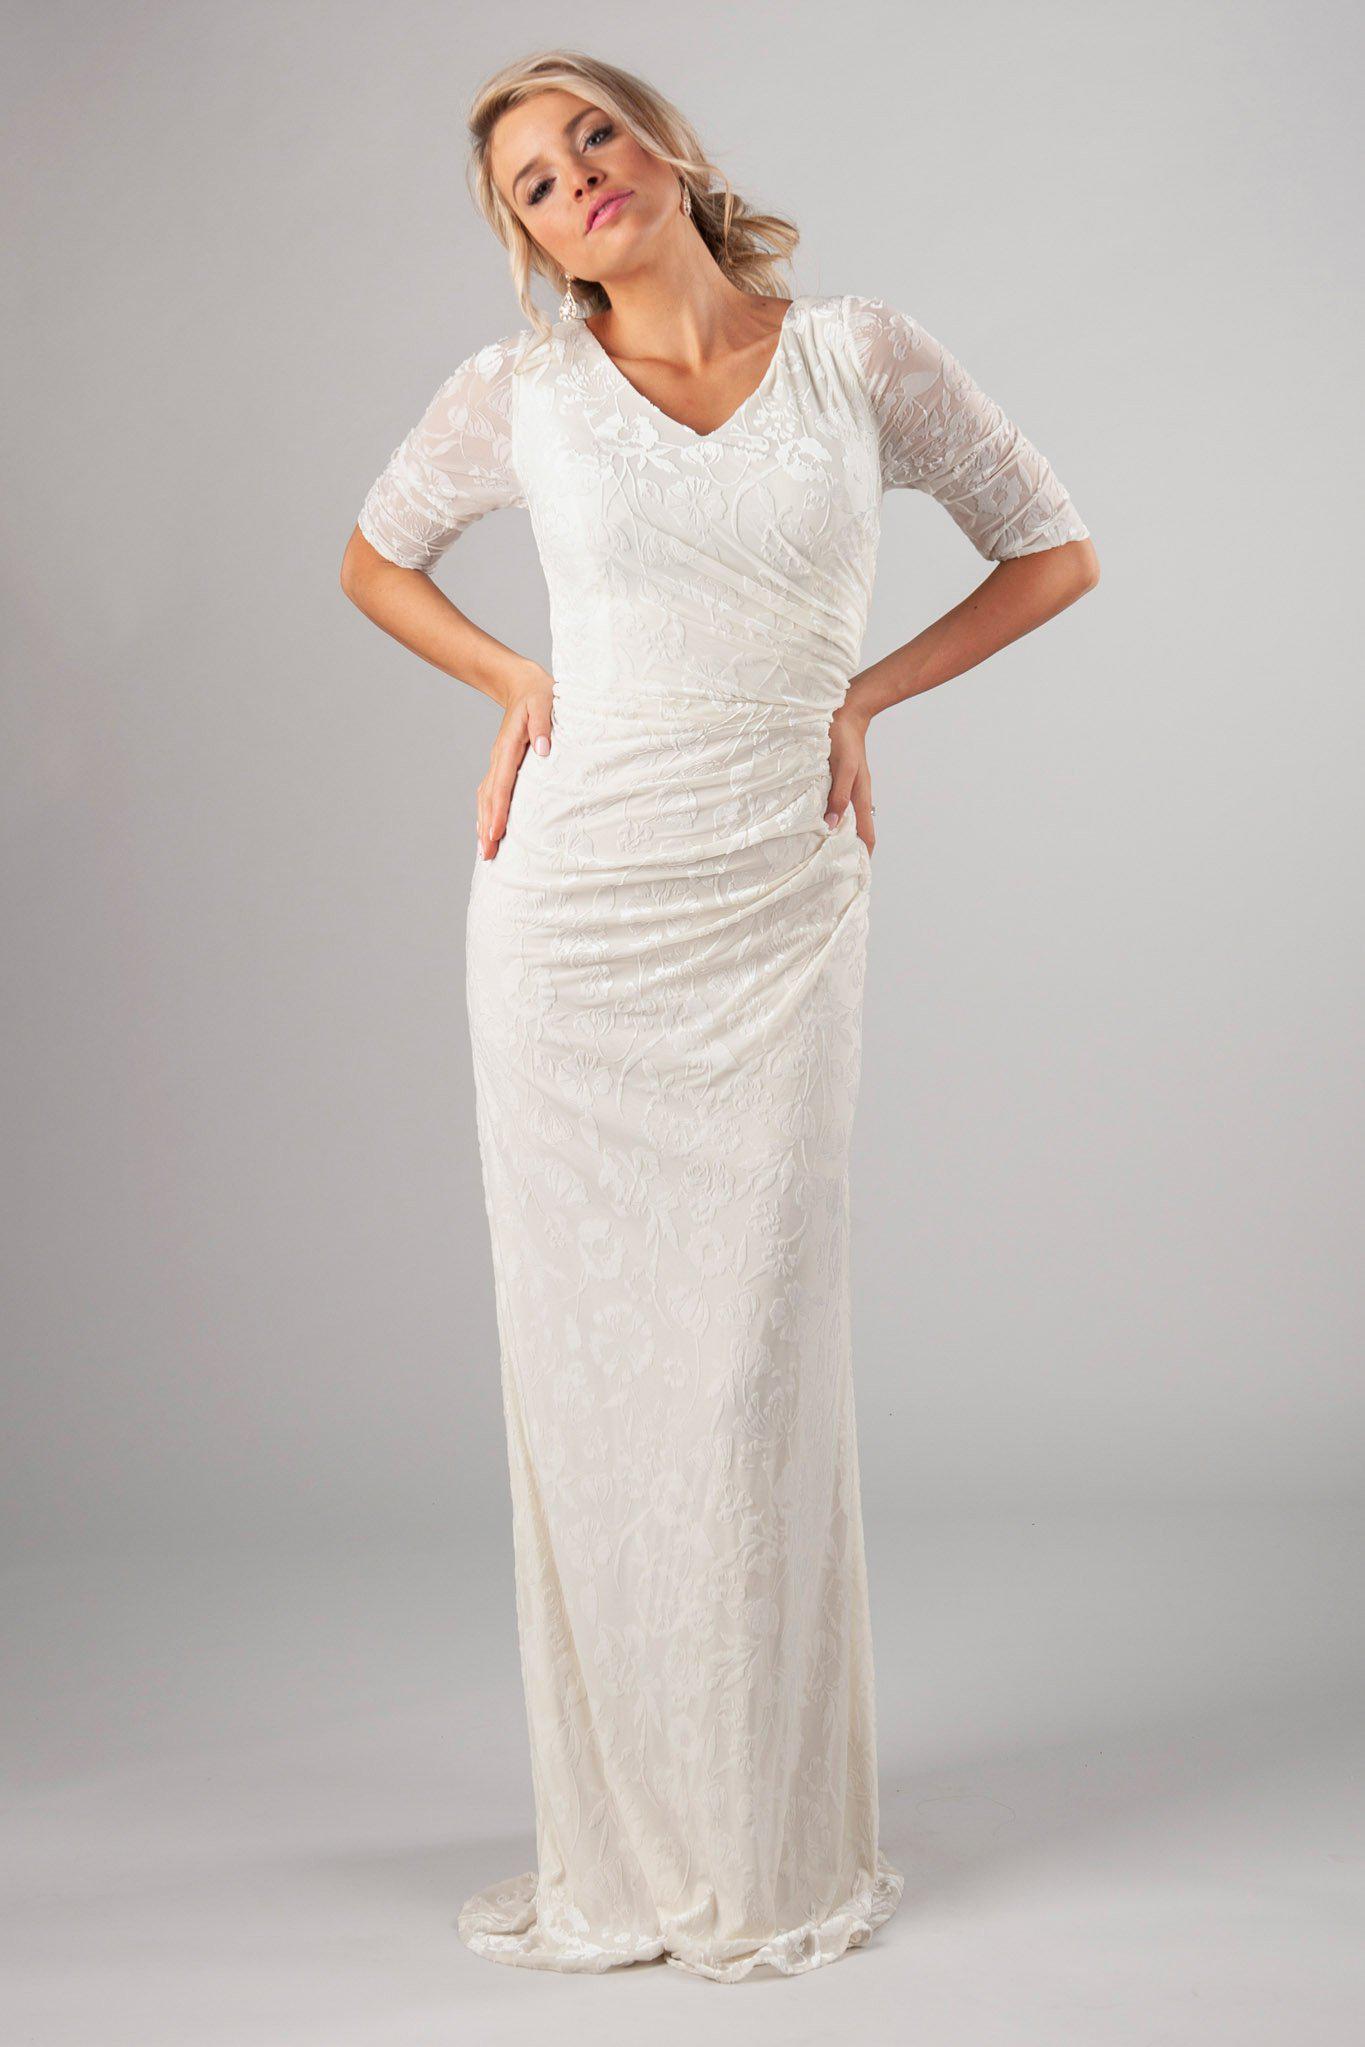 Soft and velvet bridal gown, style Katniss, is part of the Wedding Collection of LatterDayBride, a Salt Lake City bridal store.